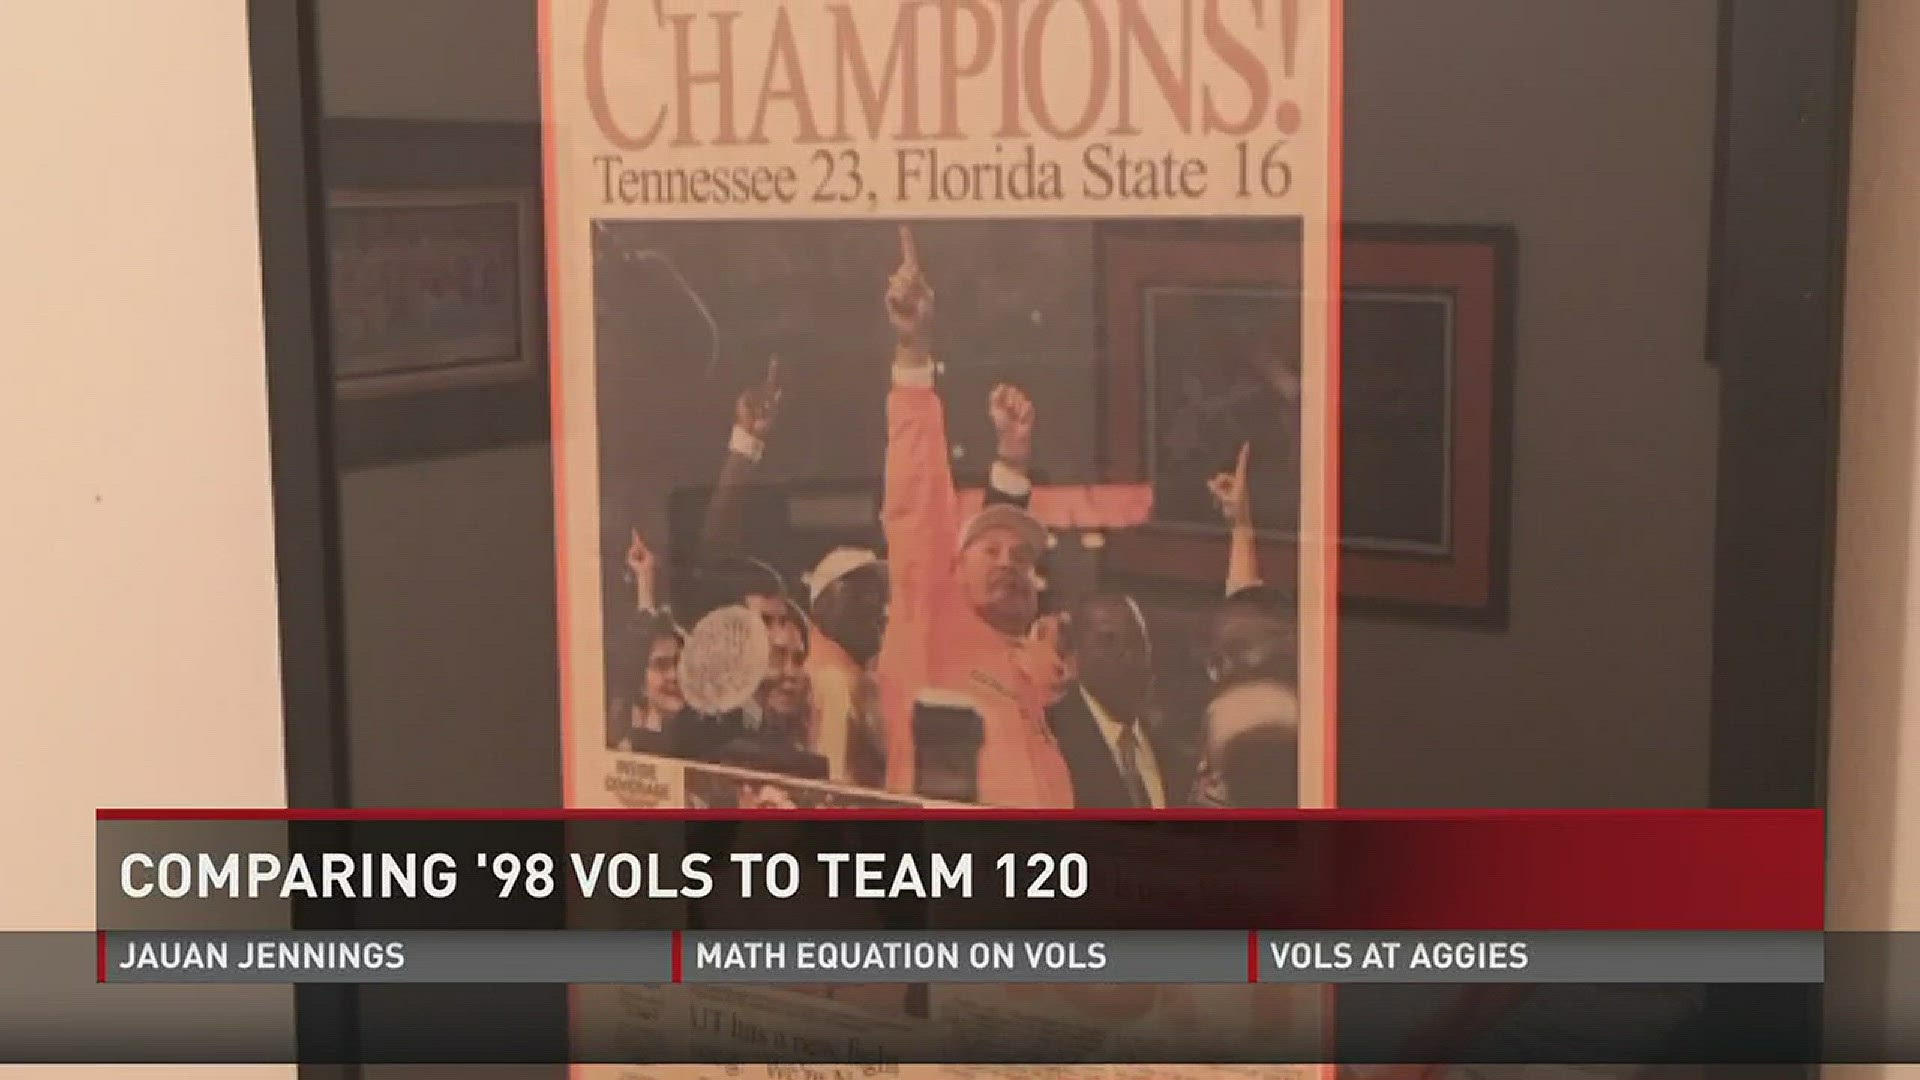 The Vols' record of 5-0 has both fans and former Vols reminiscing on the team's national championship victory in 1998.